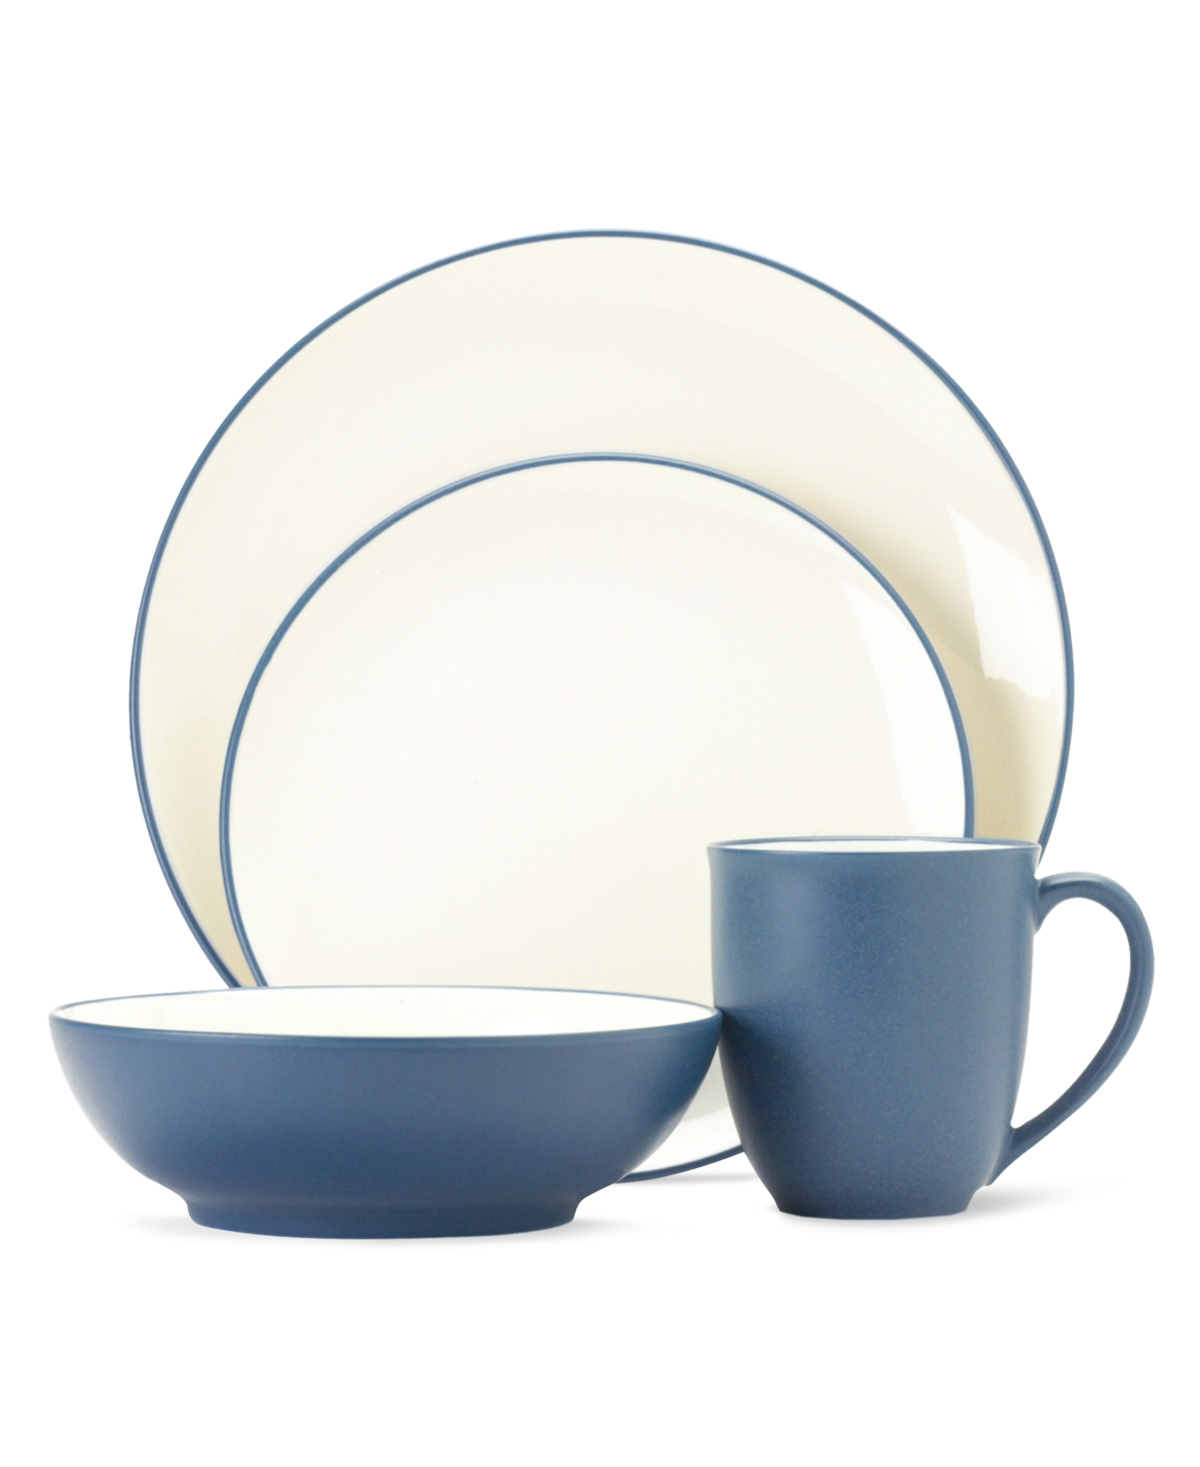 Colorwave Coupe 4 Piece Place Setting - Navy